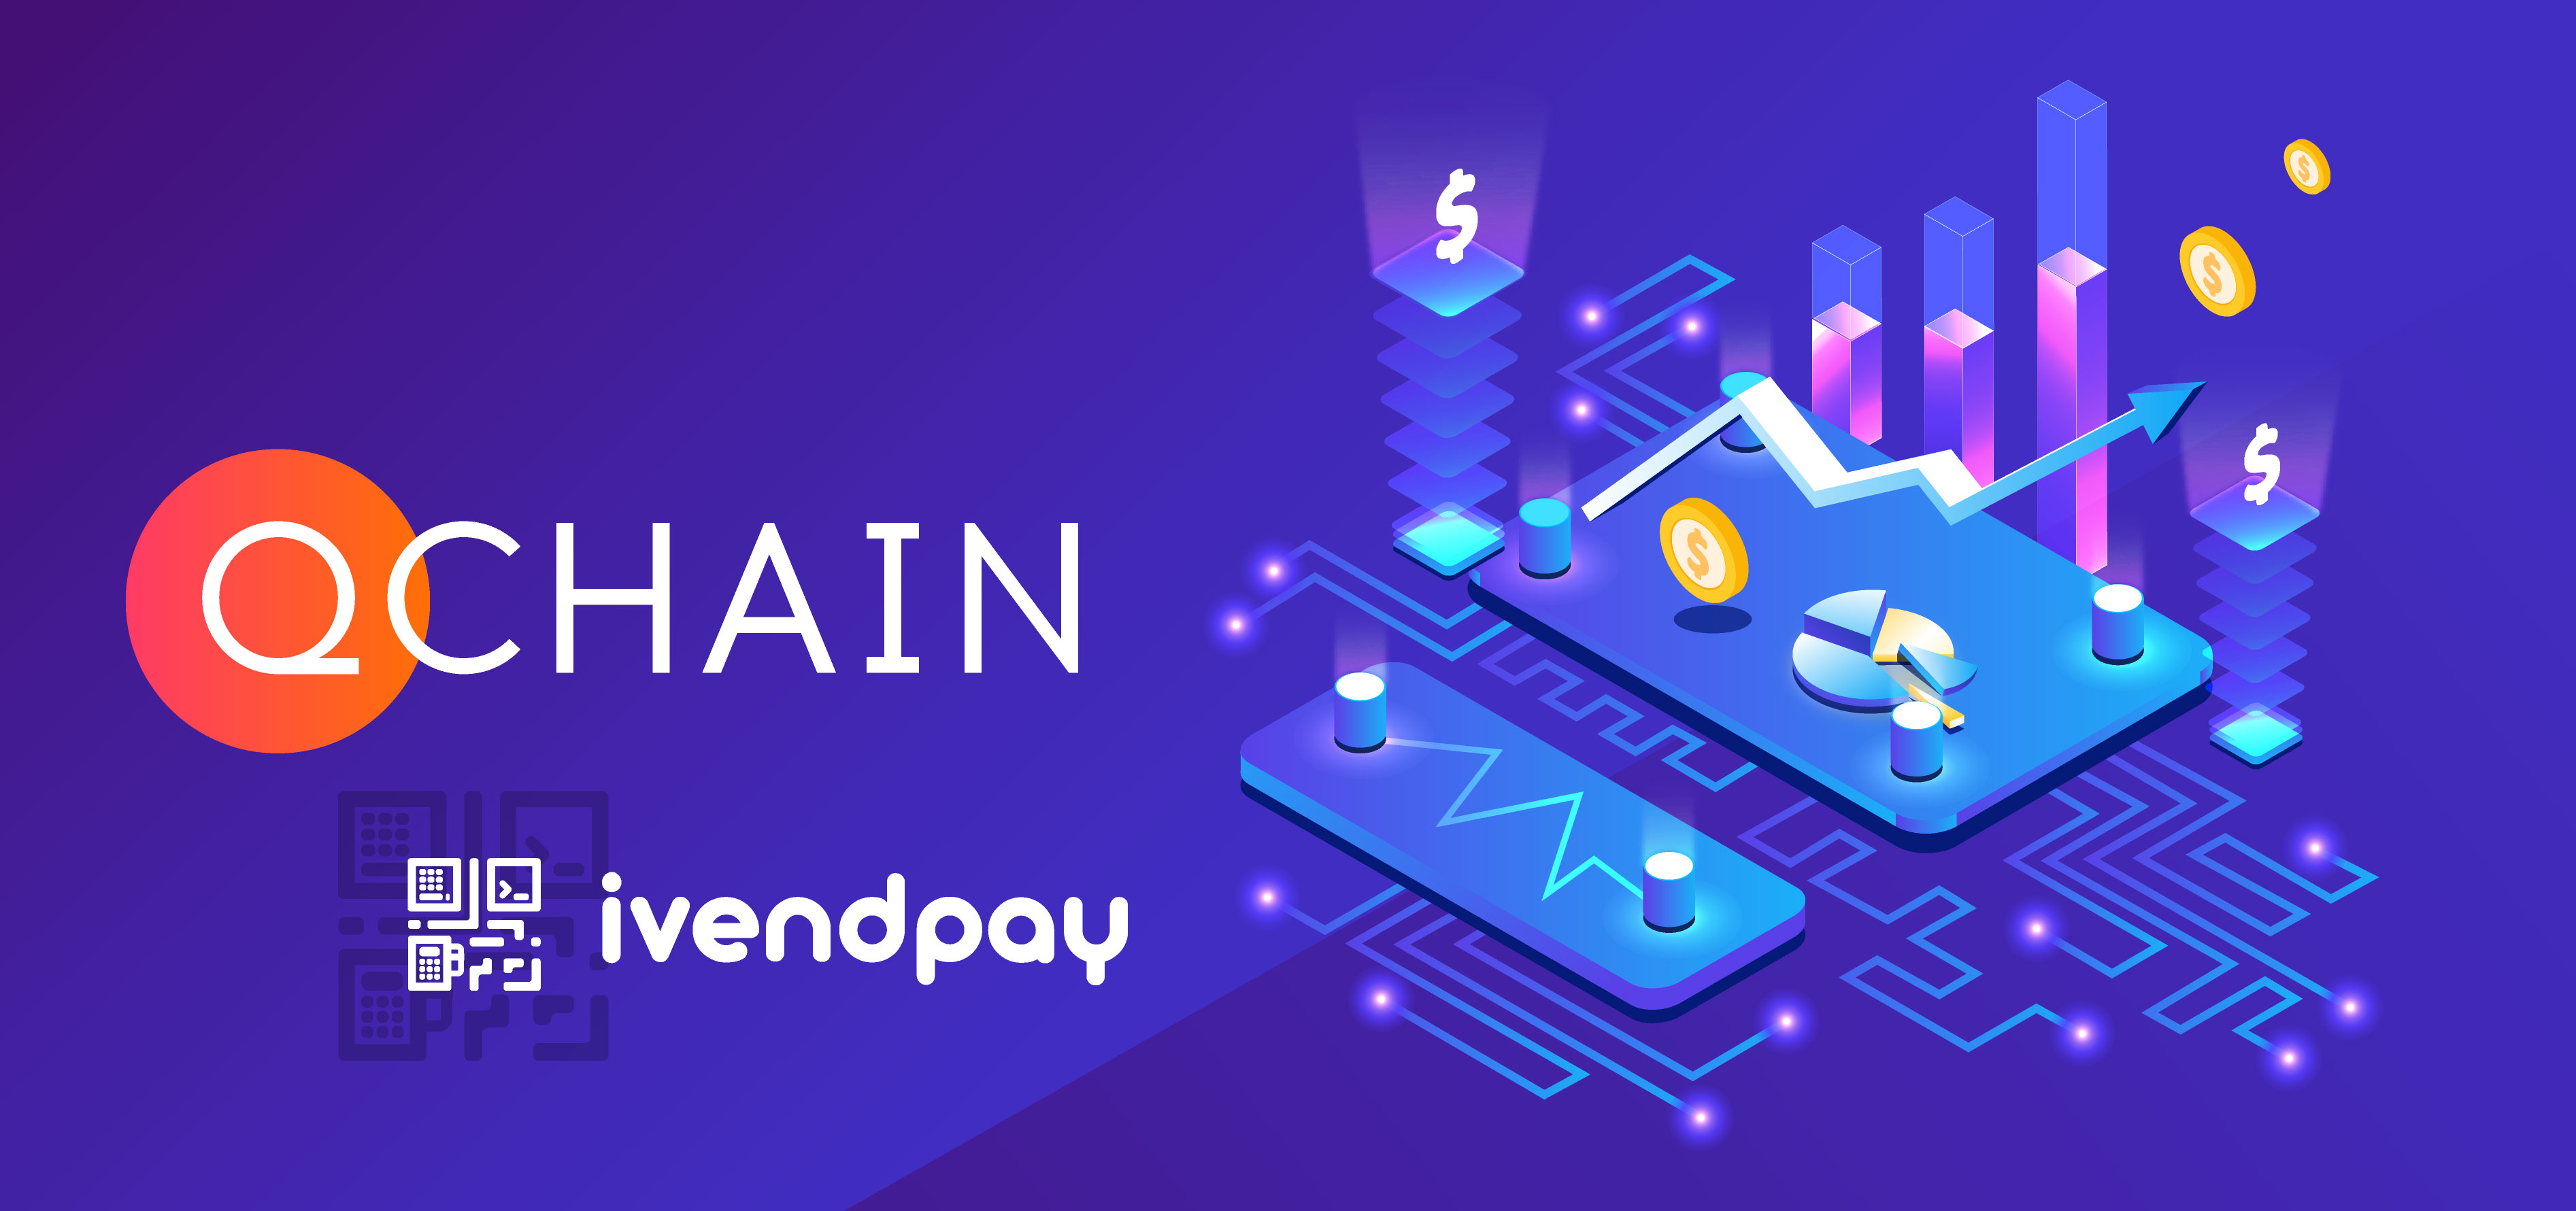 Qchain integrated into the ivendPay payment system